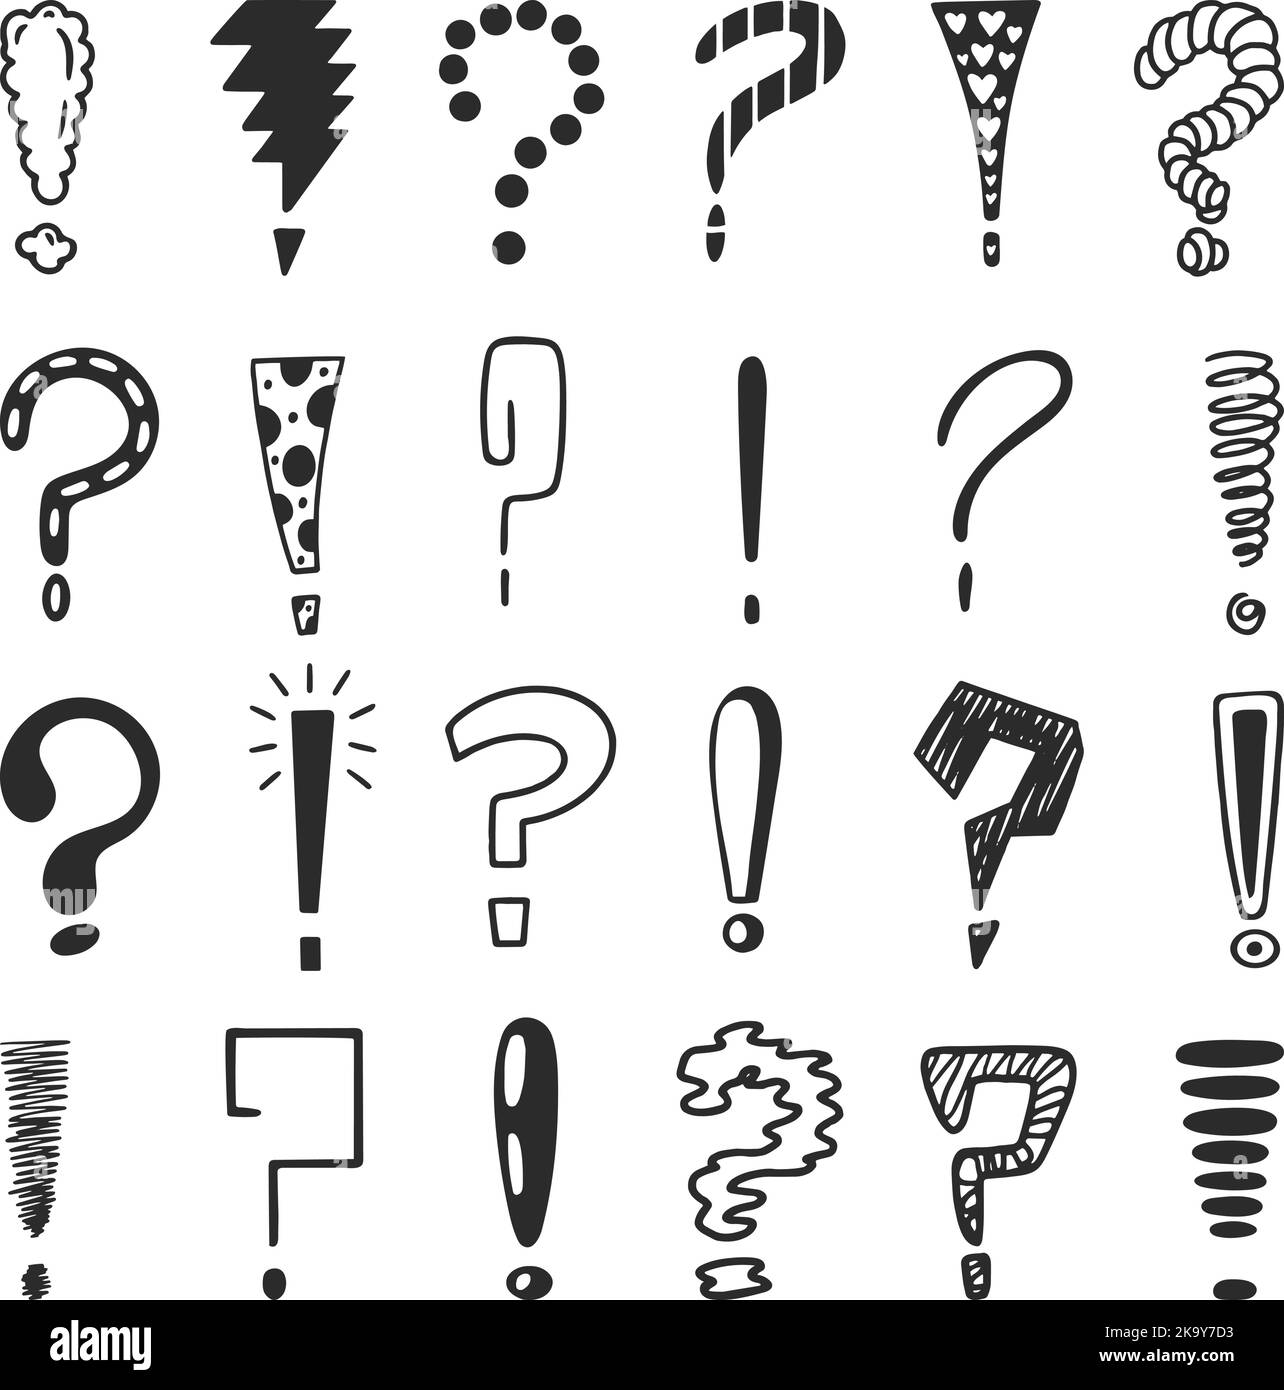 Exclamation and question points. Sketch interrogation marks, grunge scribble question exclamations signs. Problem or thinking neoteric vector symbols Stock Vector